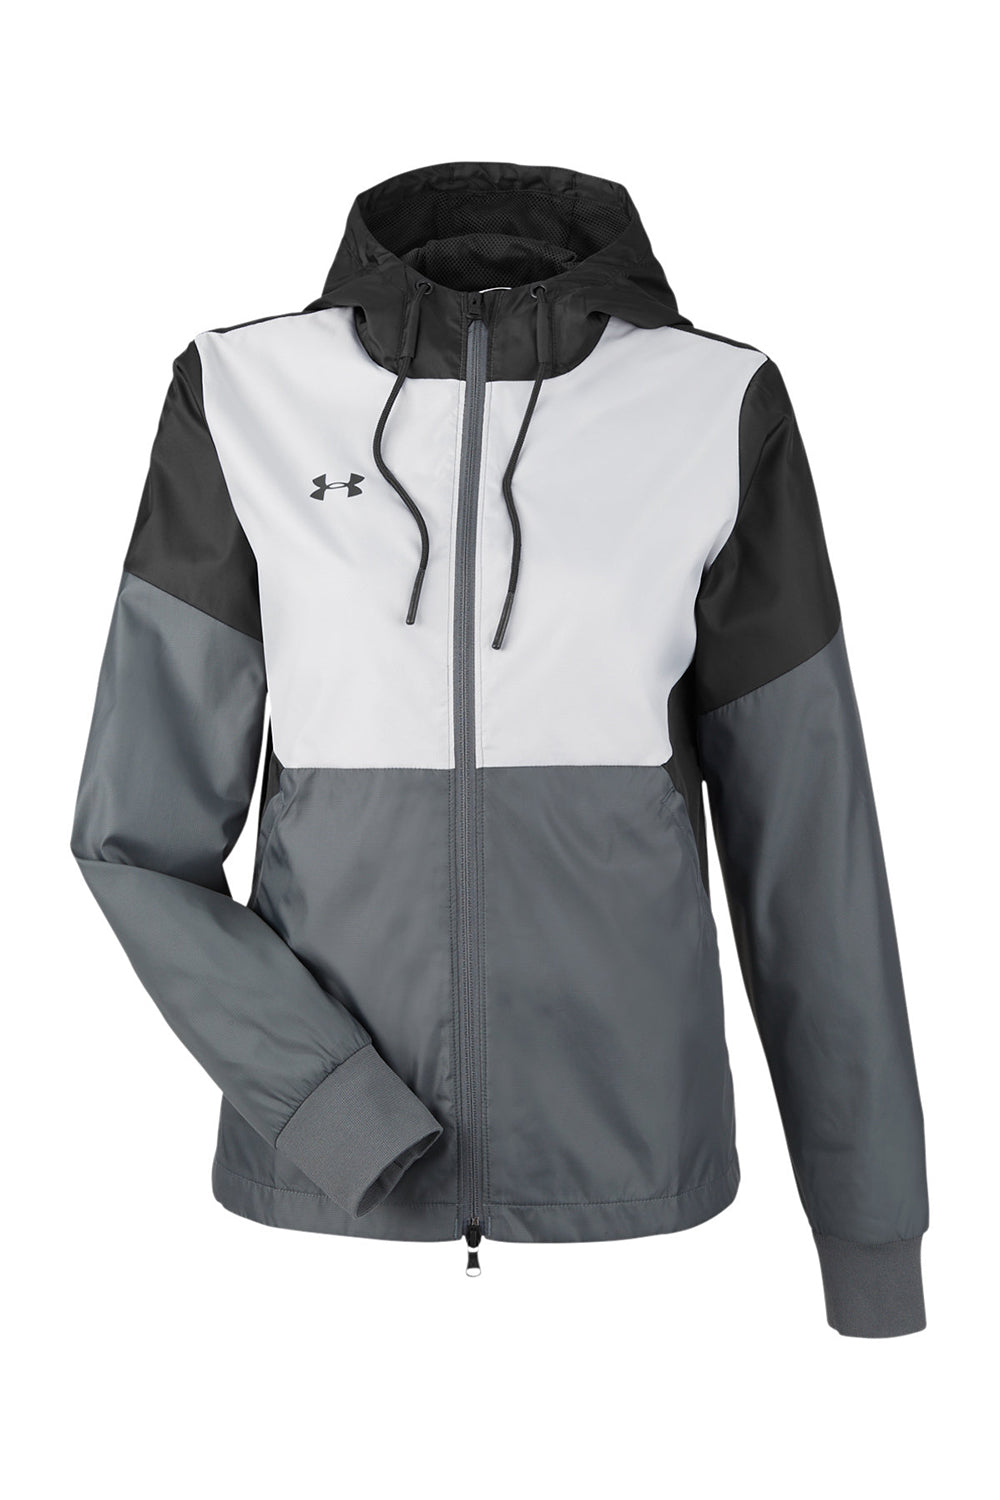 Under Armour 1359348 Womens Team Legacy Wind & Water Resistant Full Zip Hooded Jacket Black Flat Front